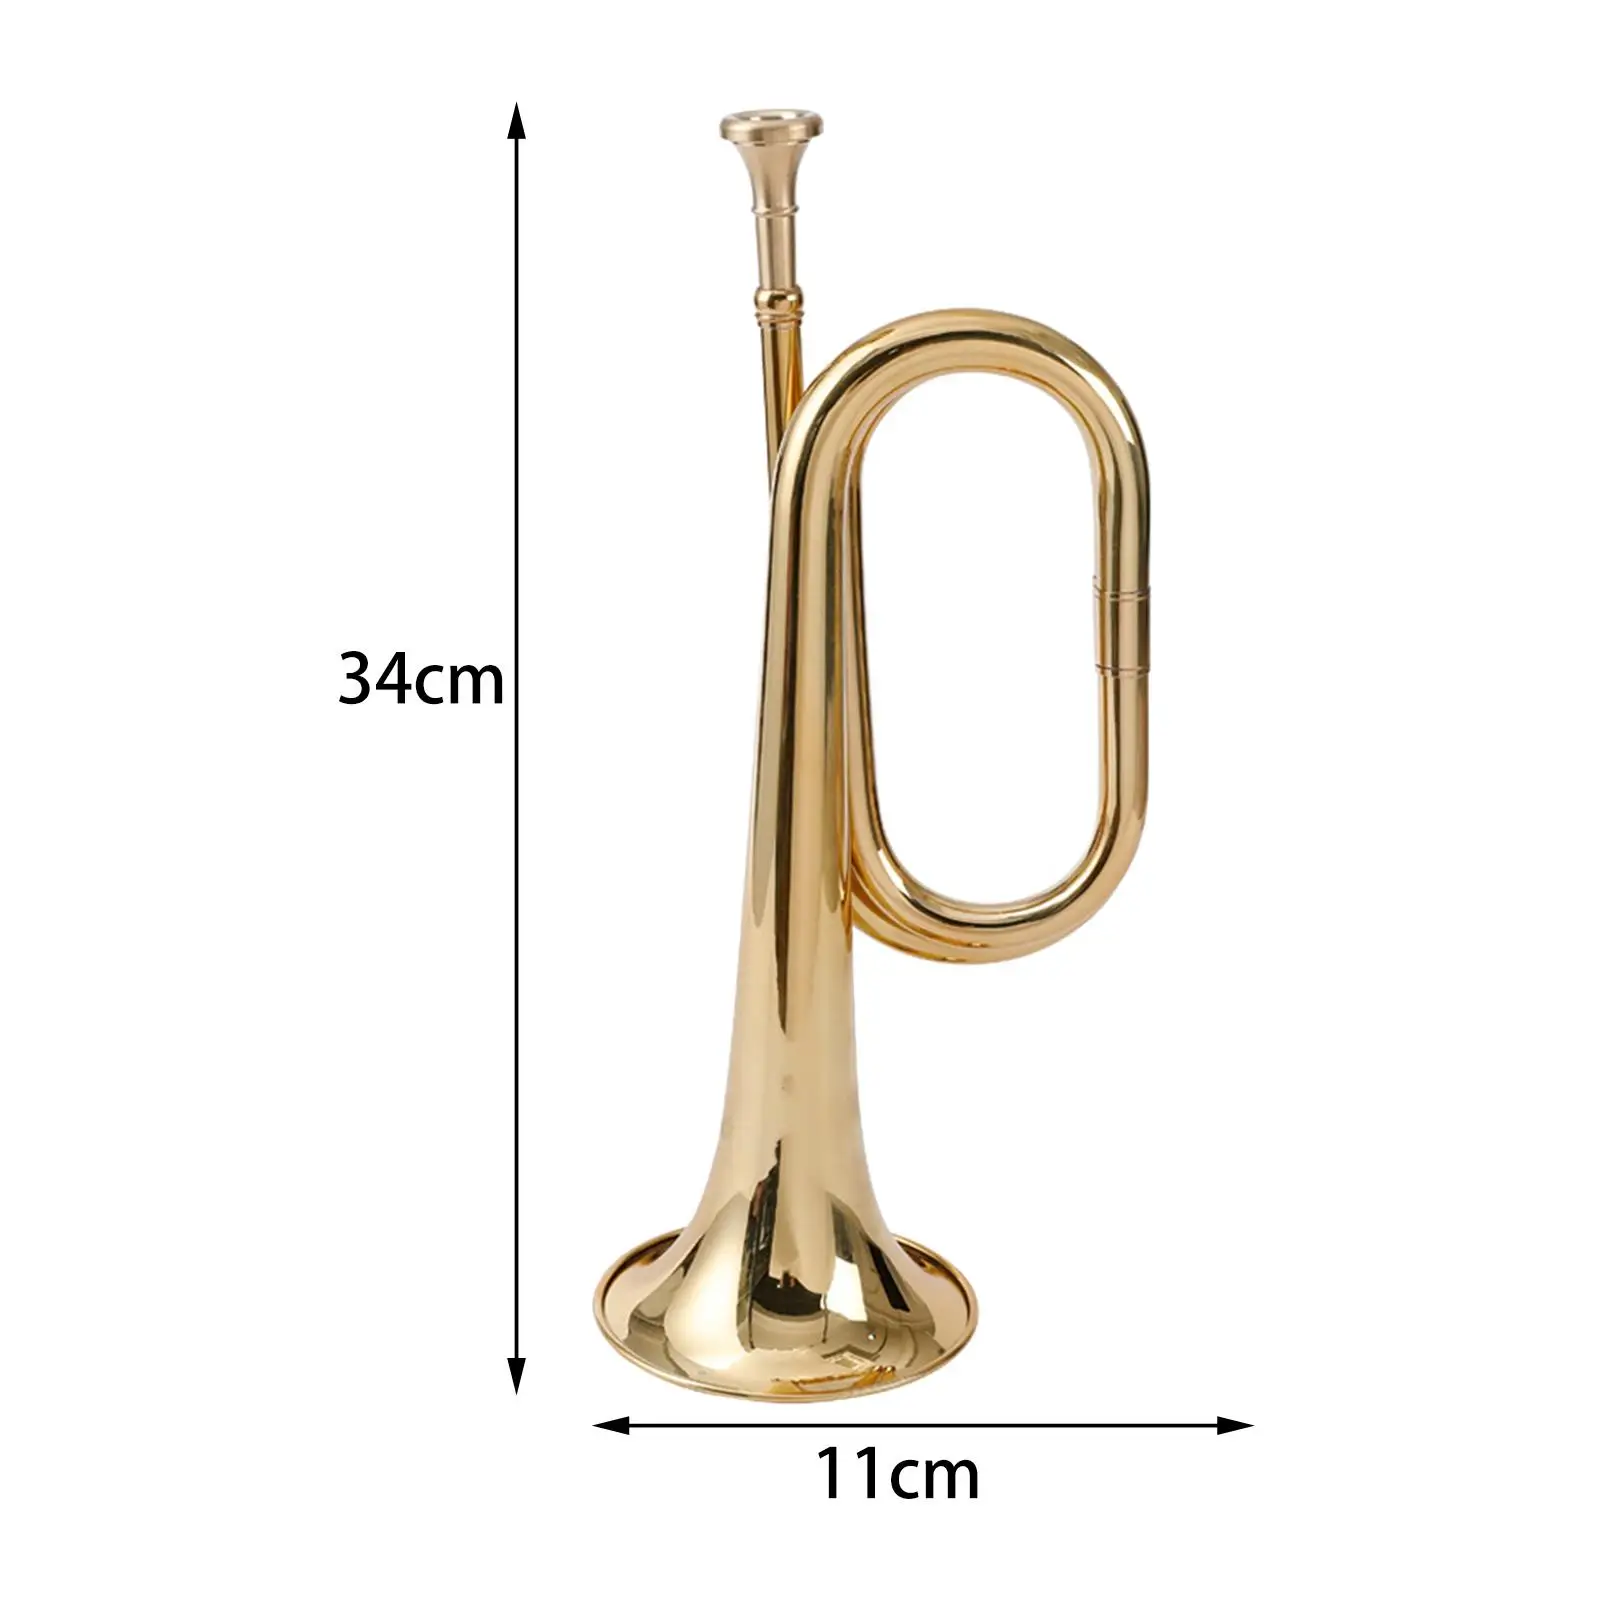 

BB Bugle Musical Instrument Orchestra Music Brass Blowing Trumpet for Orchestra Parties Kids Professional Beginners